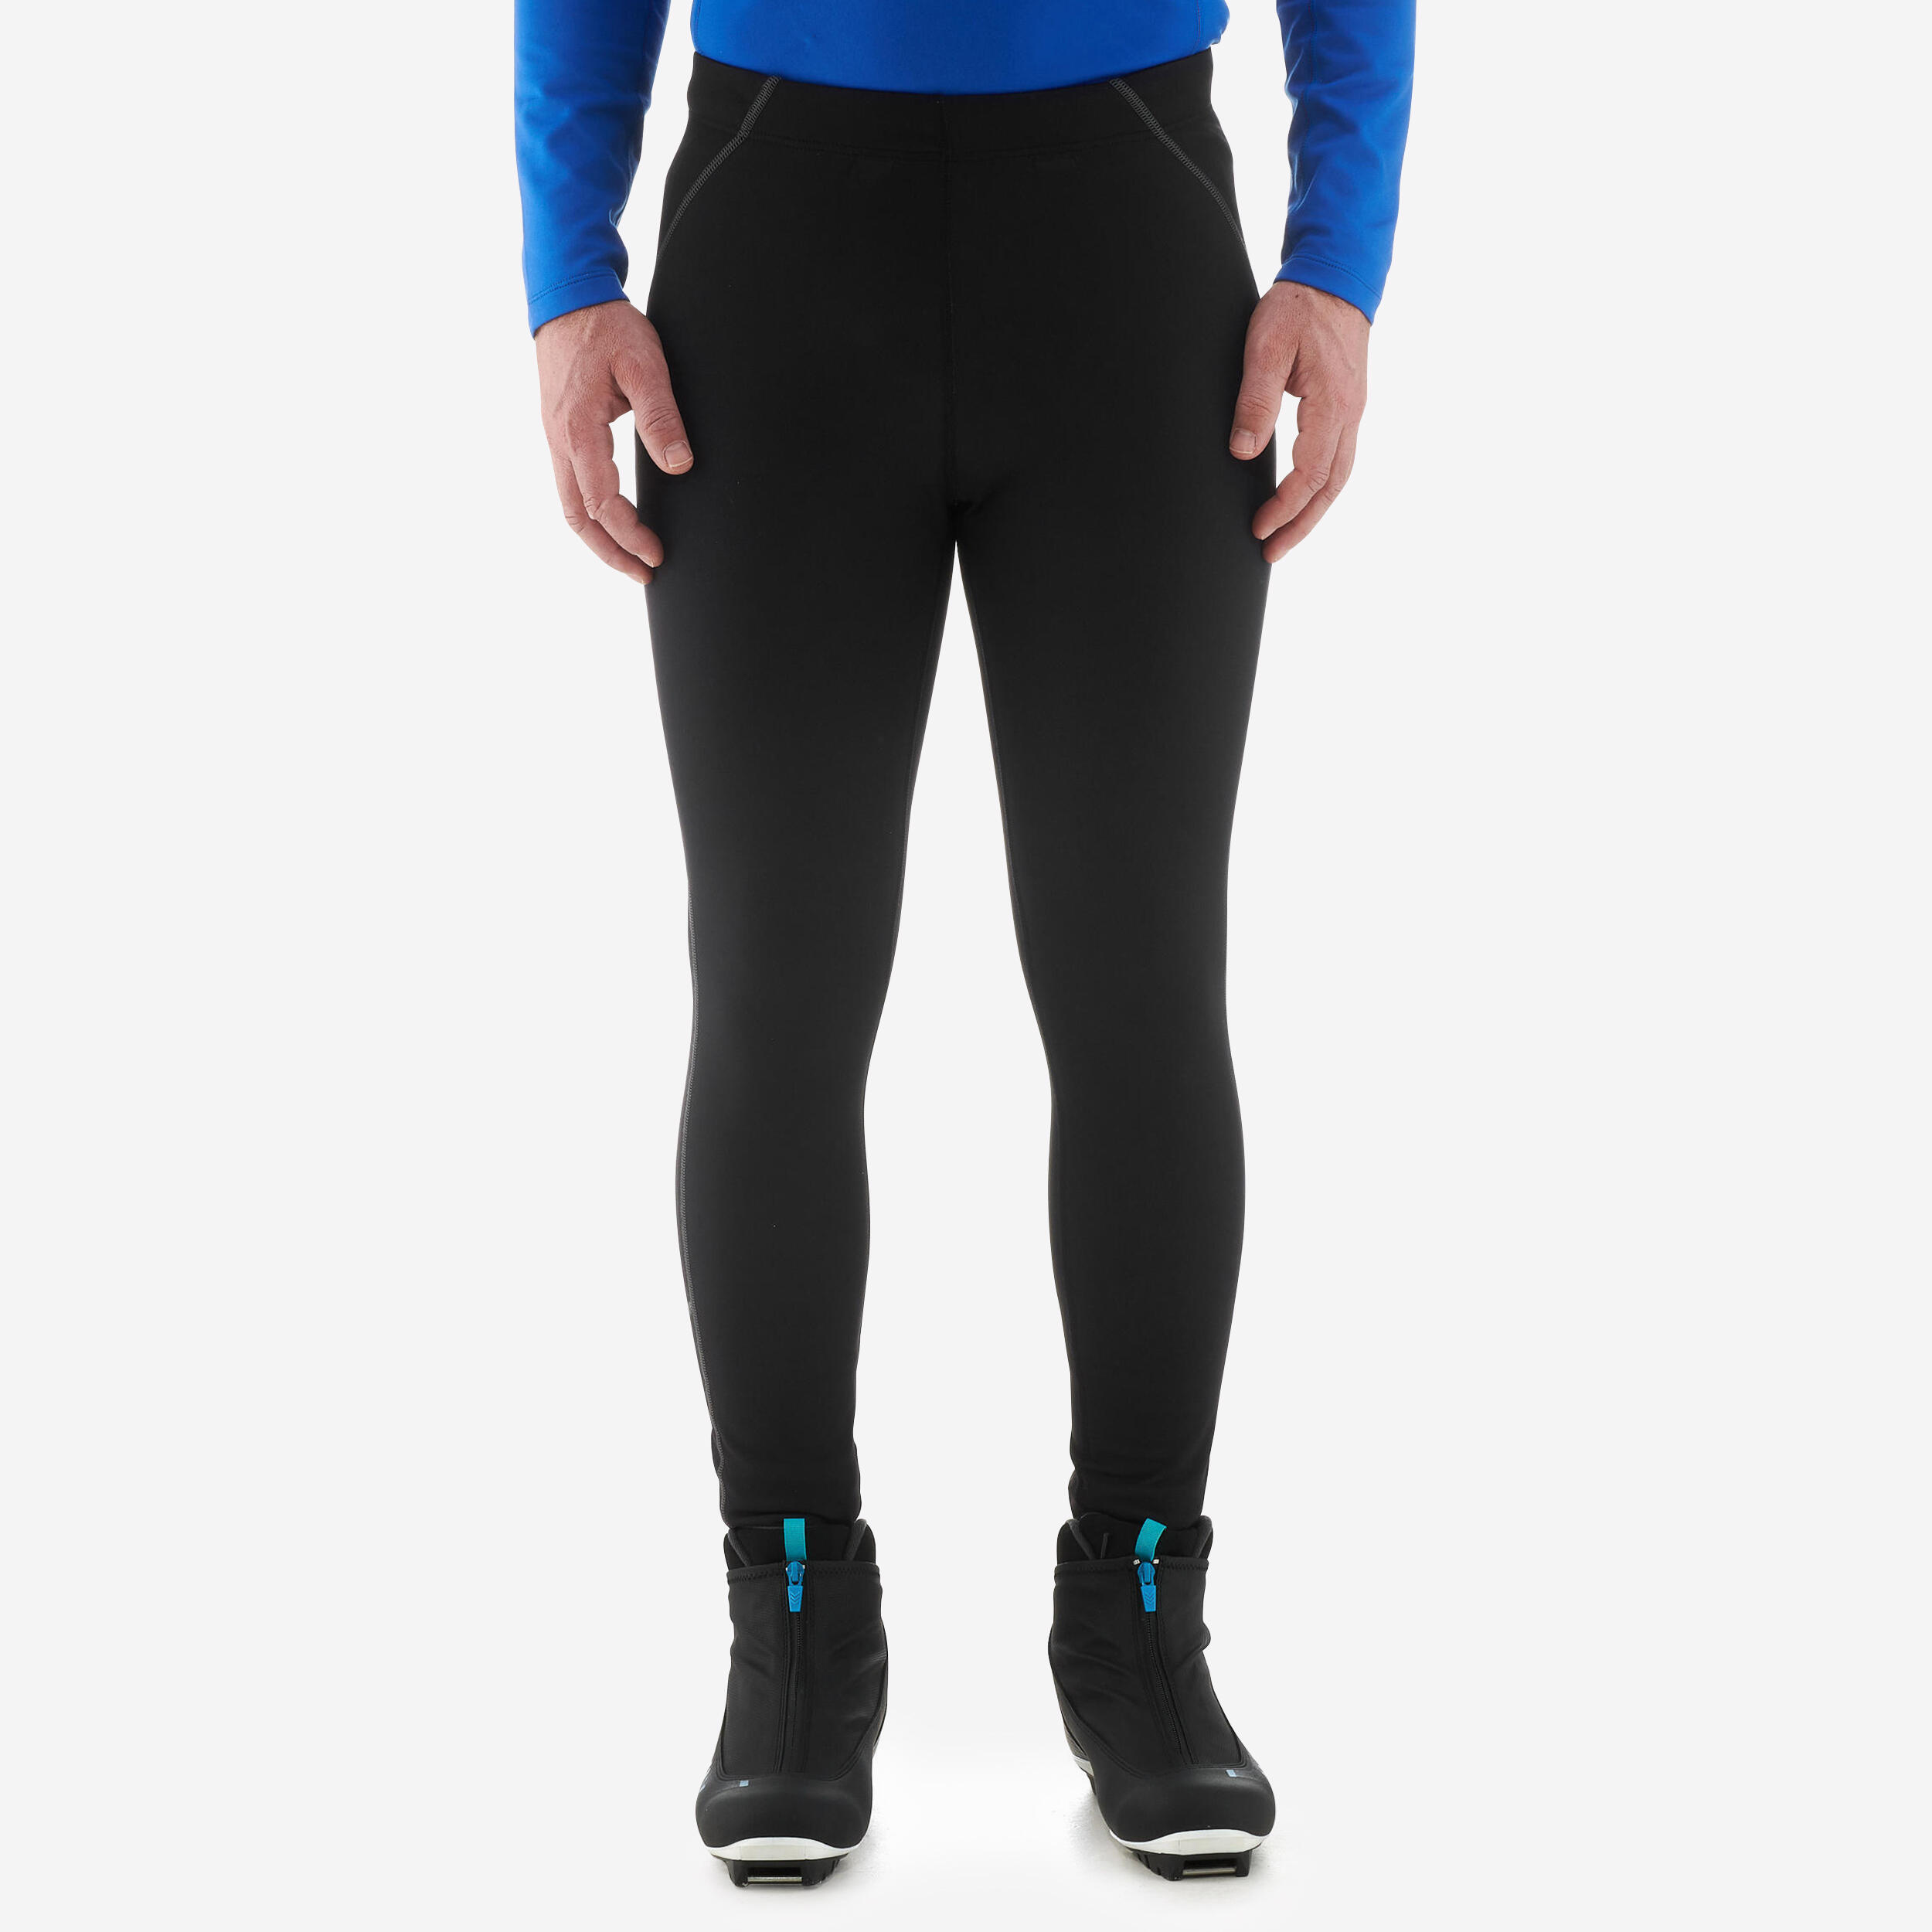 Warm thermal tights for men, women and children's cross-country skiing.